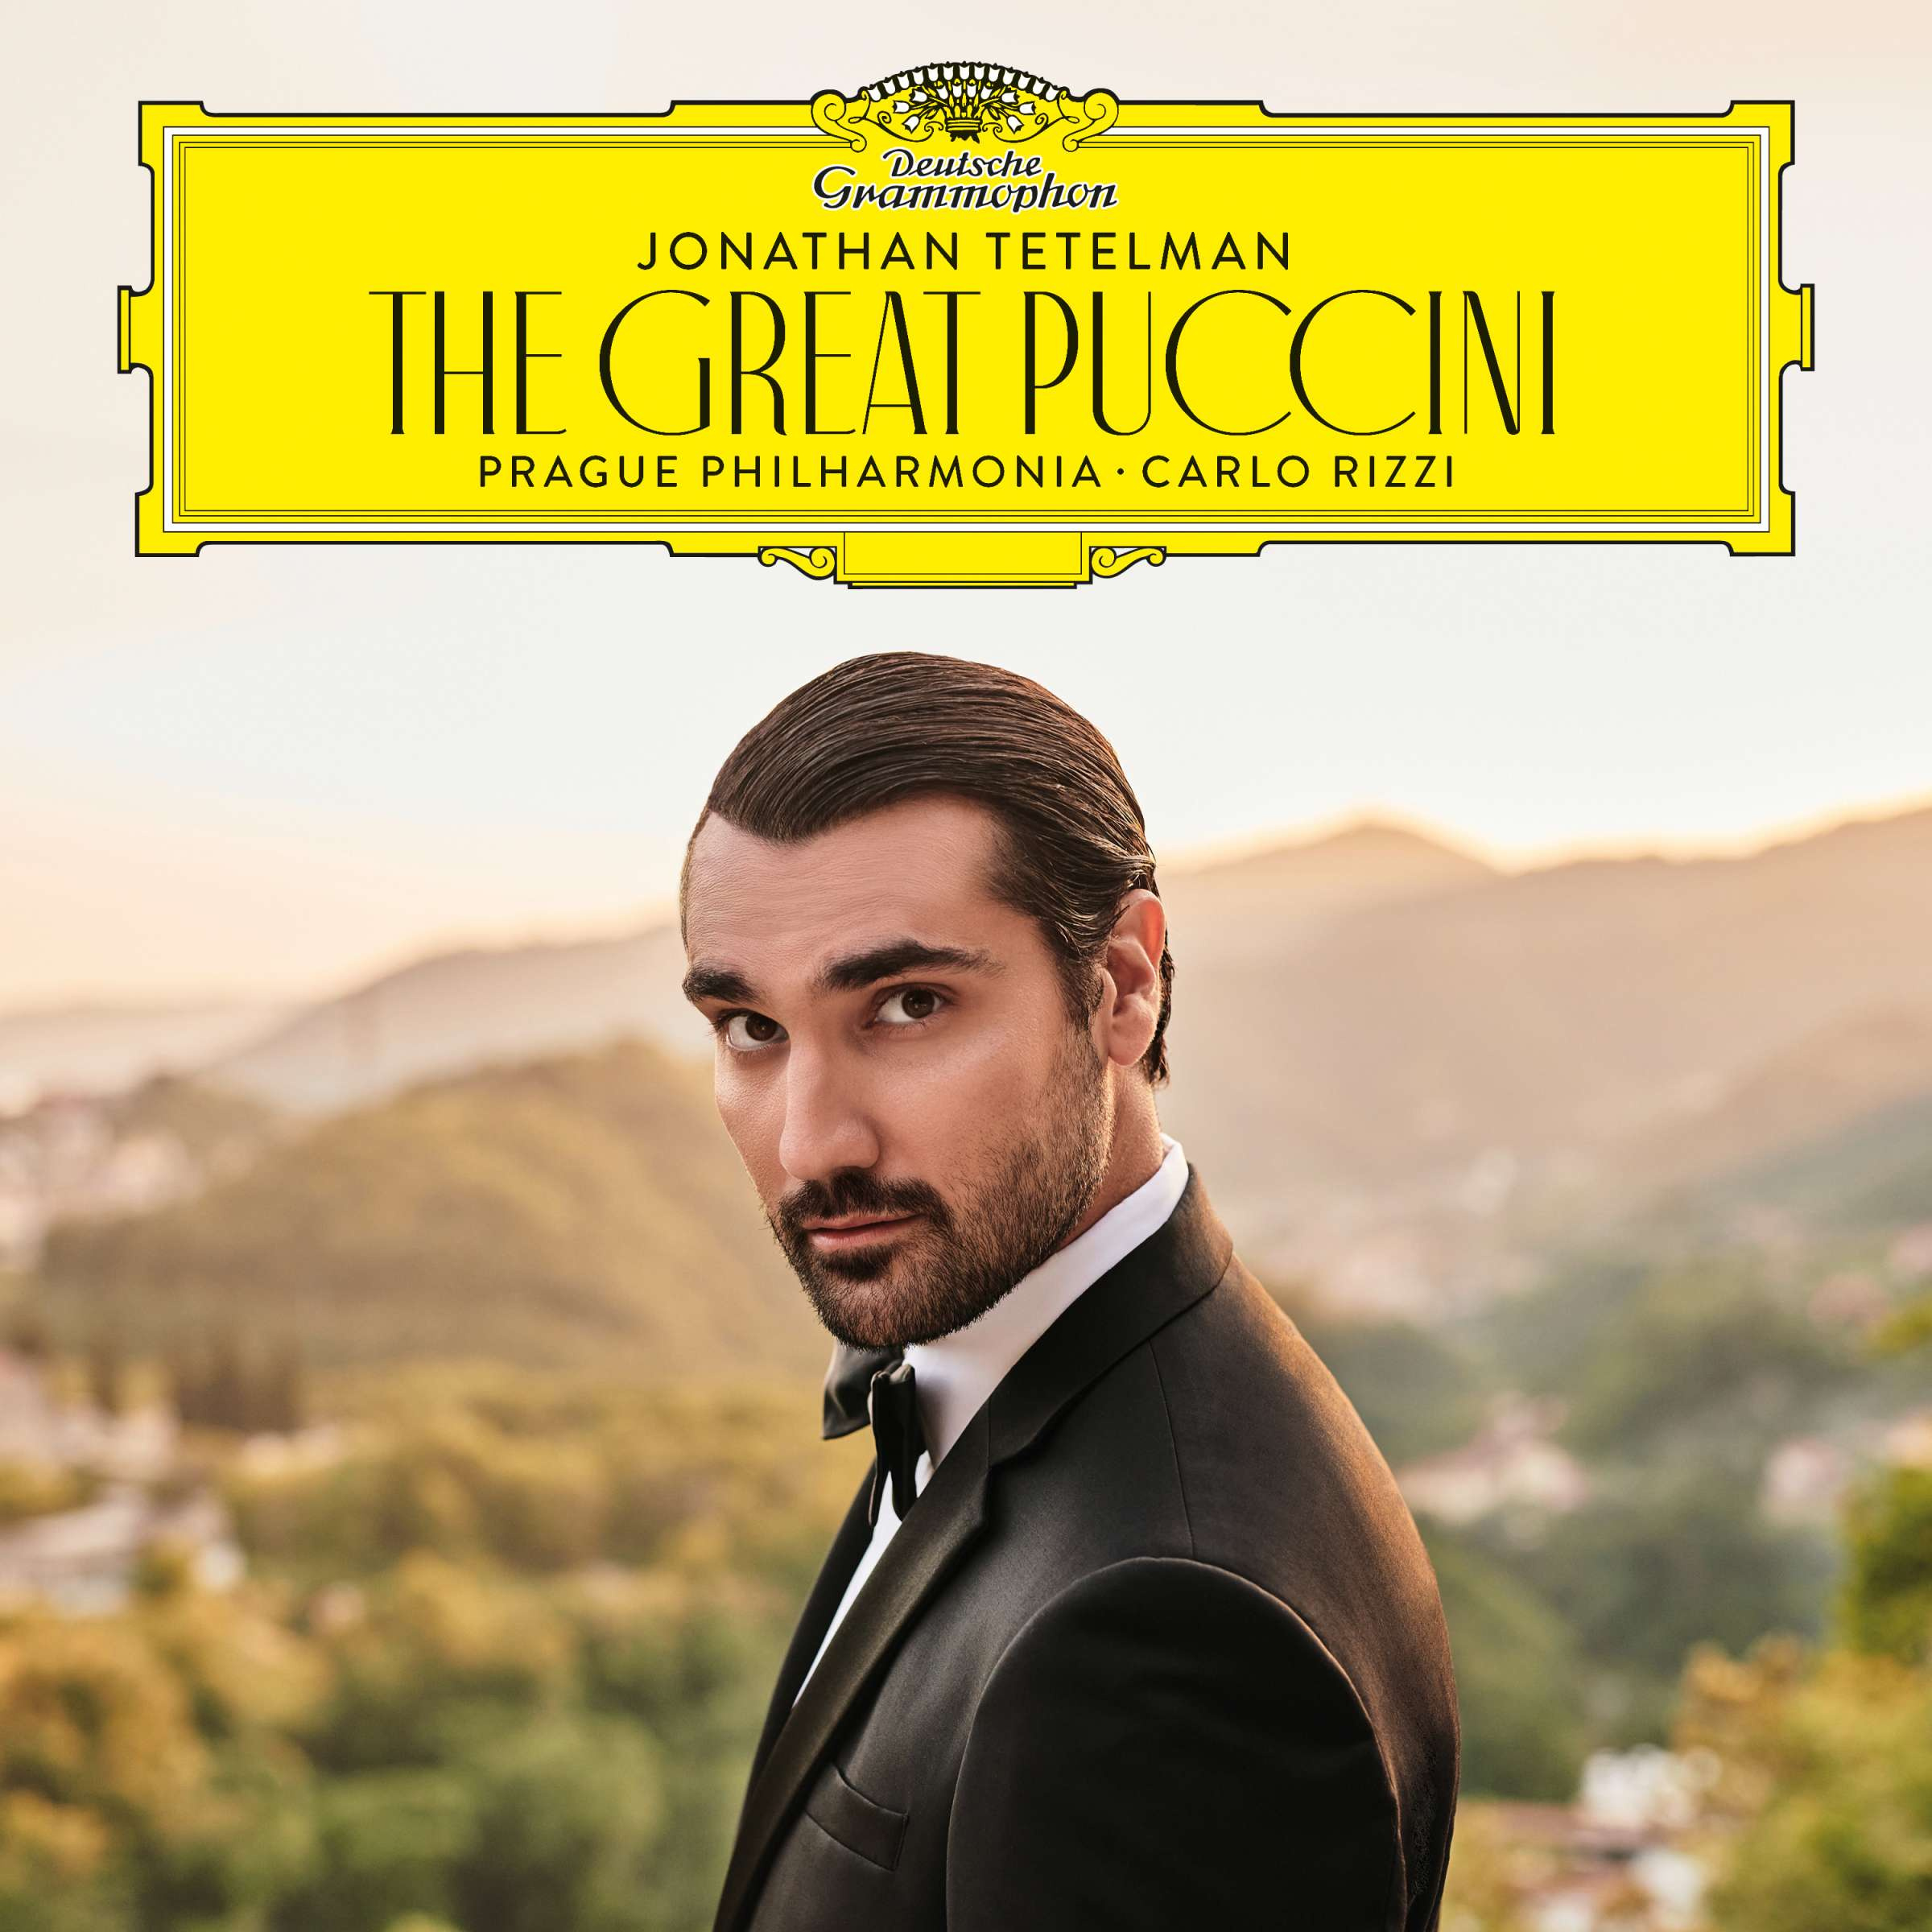 THE GREAT PUCCINI